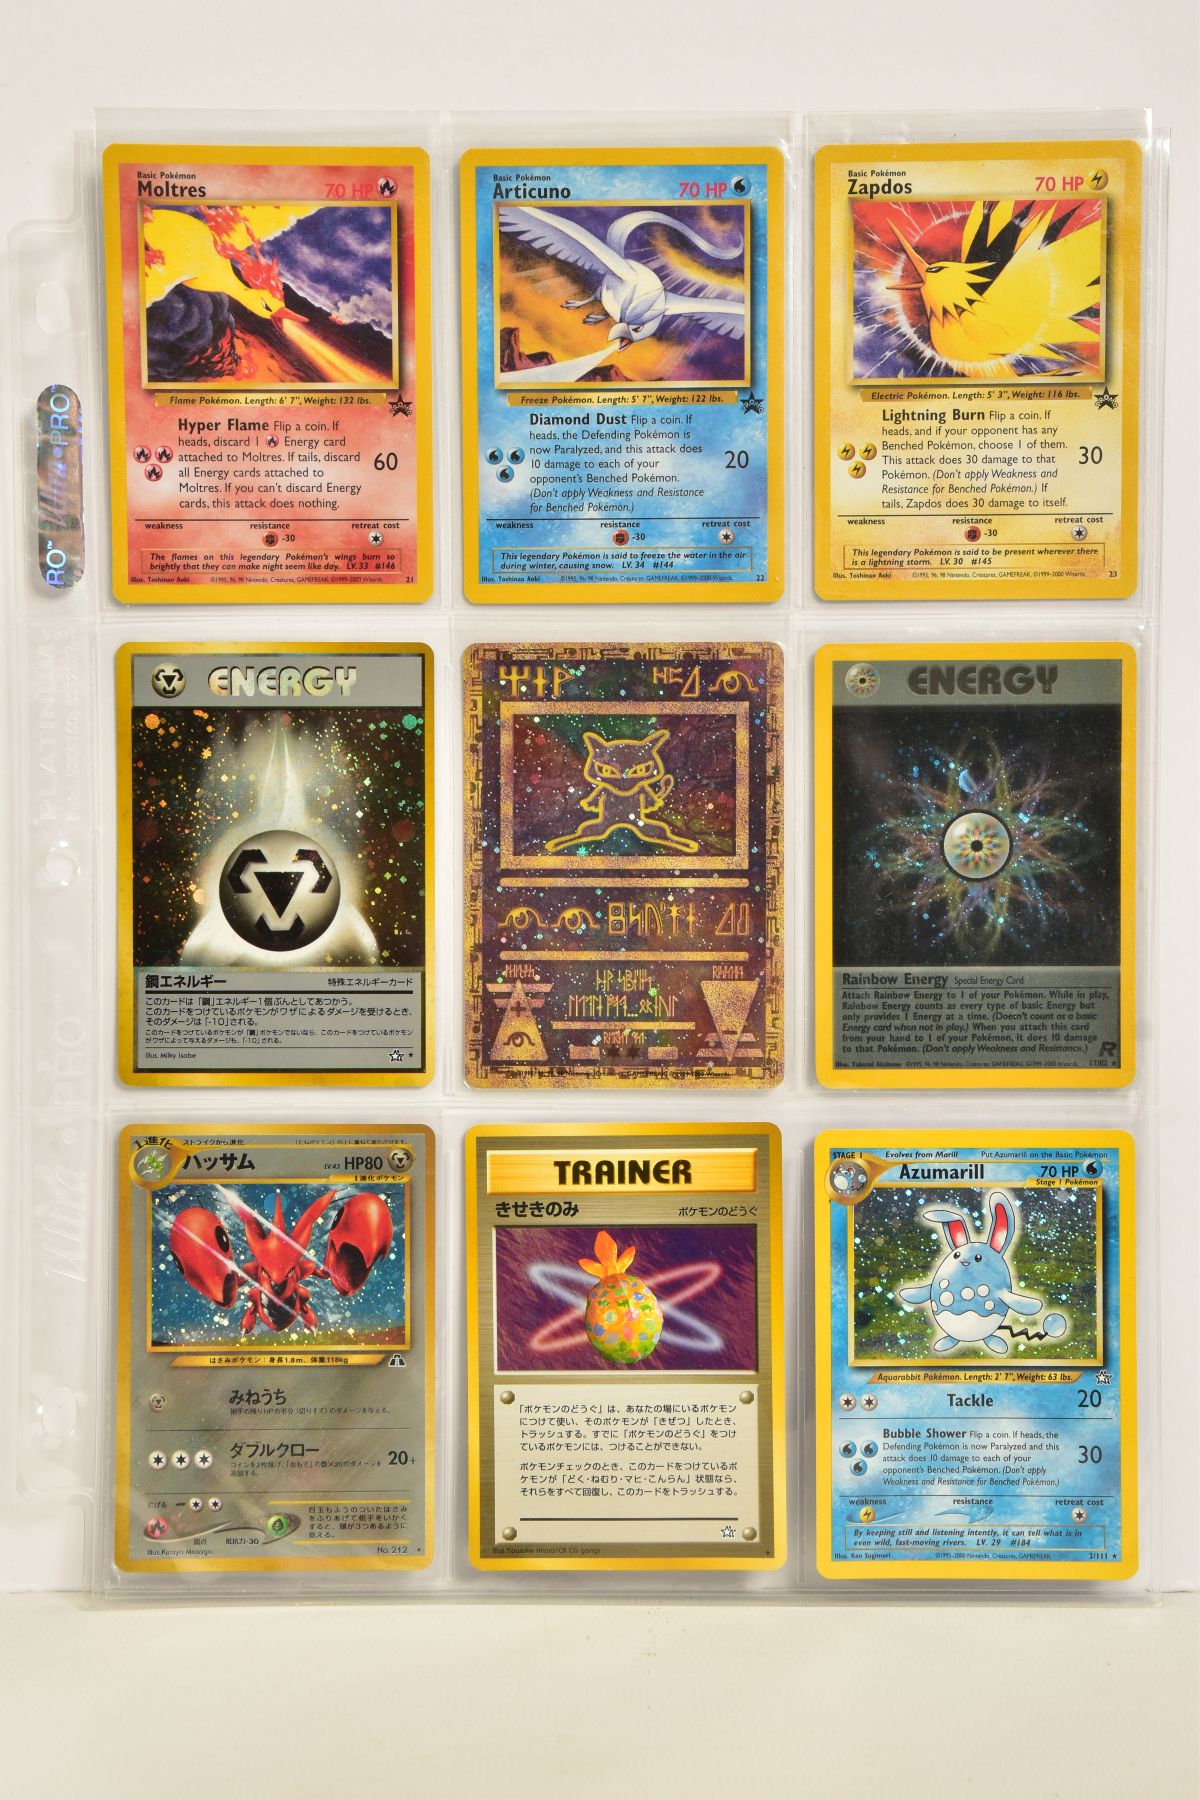 A QUANTITY OF POKEMON TCG CARDS, cards are assorted from Base Set, Base Set 2, Jungle, Fossil, - Image 46 of 46